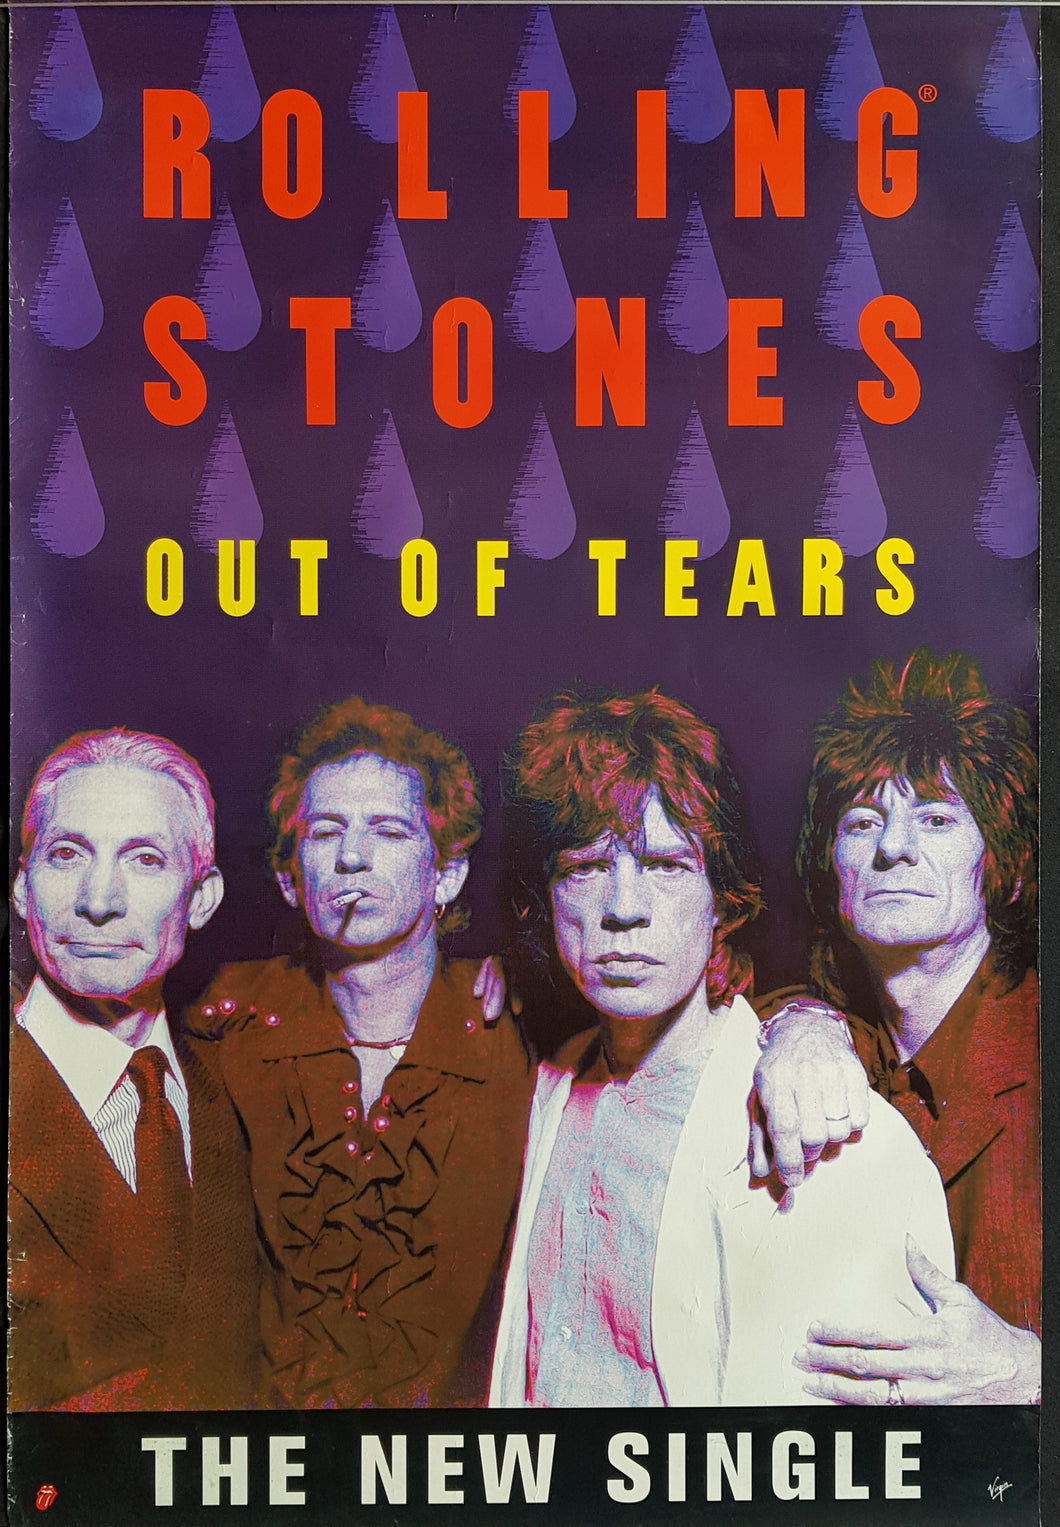 Rolling Stones - Out Of Tears - The New Single